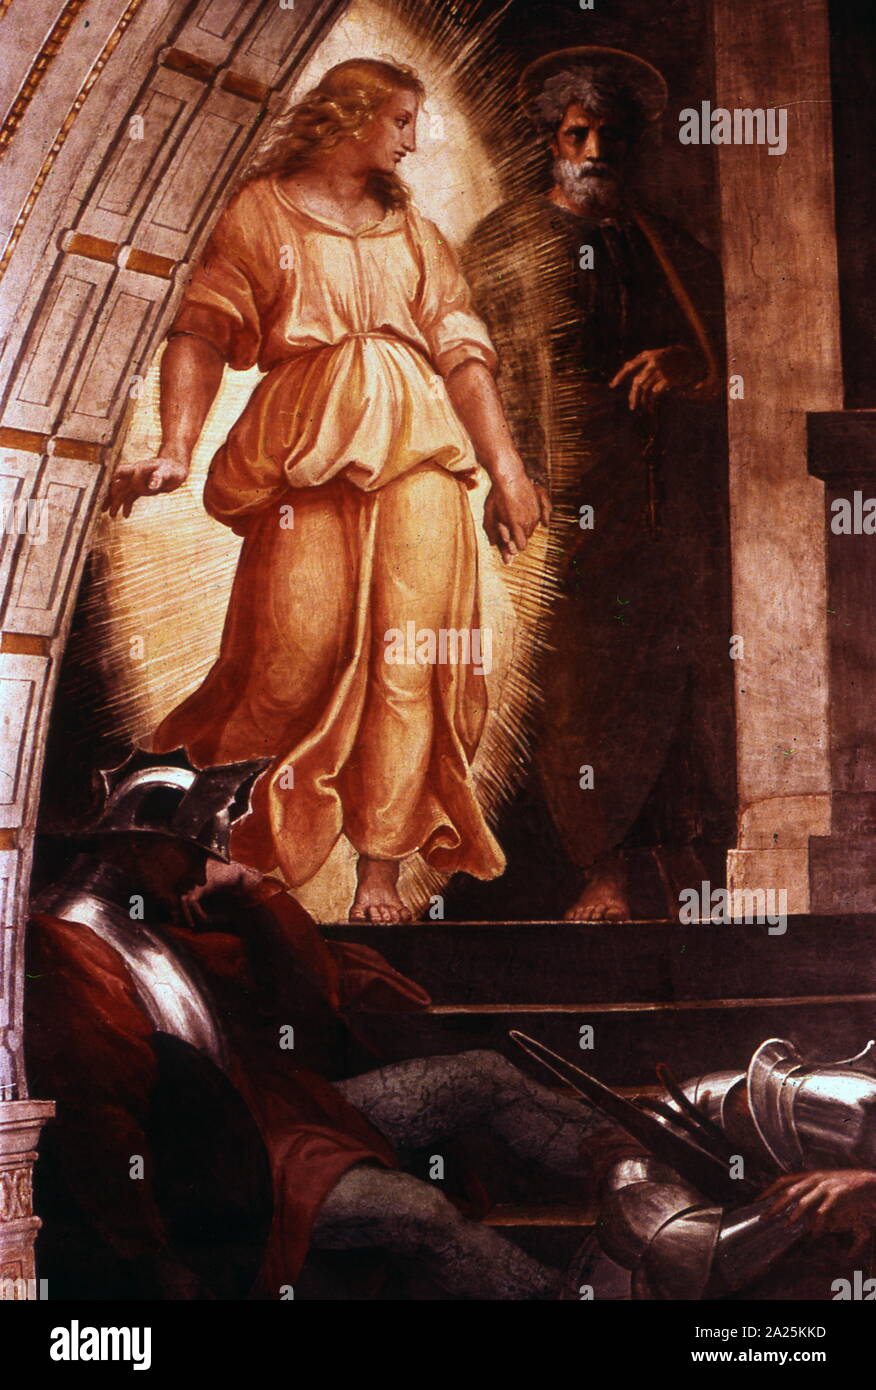 The Liberation of Saint Peter (detail) from a fresco painting by the Italian High Renaissance artist Raphael. It was painted in 1514 as part of Raphael's commission to decorate with frescoes the rooms that are now known as the Stanze di Raffaello, in the Apostolic Palace in the Vatican. The painting shows how Saint Peter was liberated from Herod's prison by an angel, as described in Acts 12. an angel guides Peter past the sleeping guards. Stock Photo